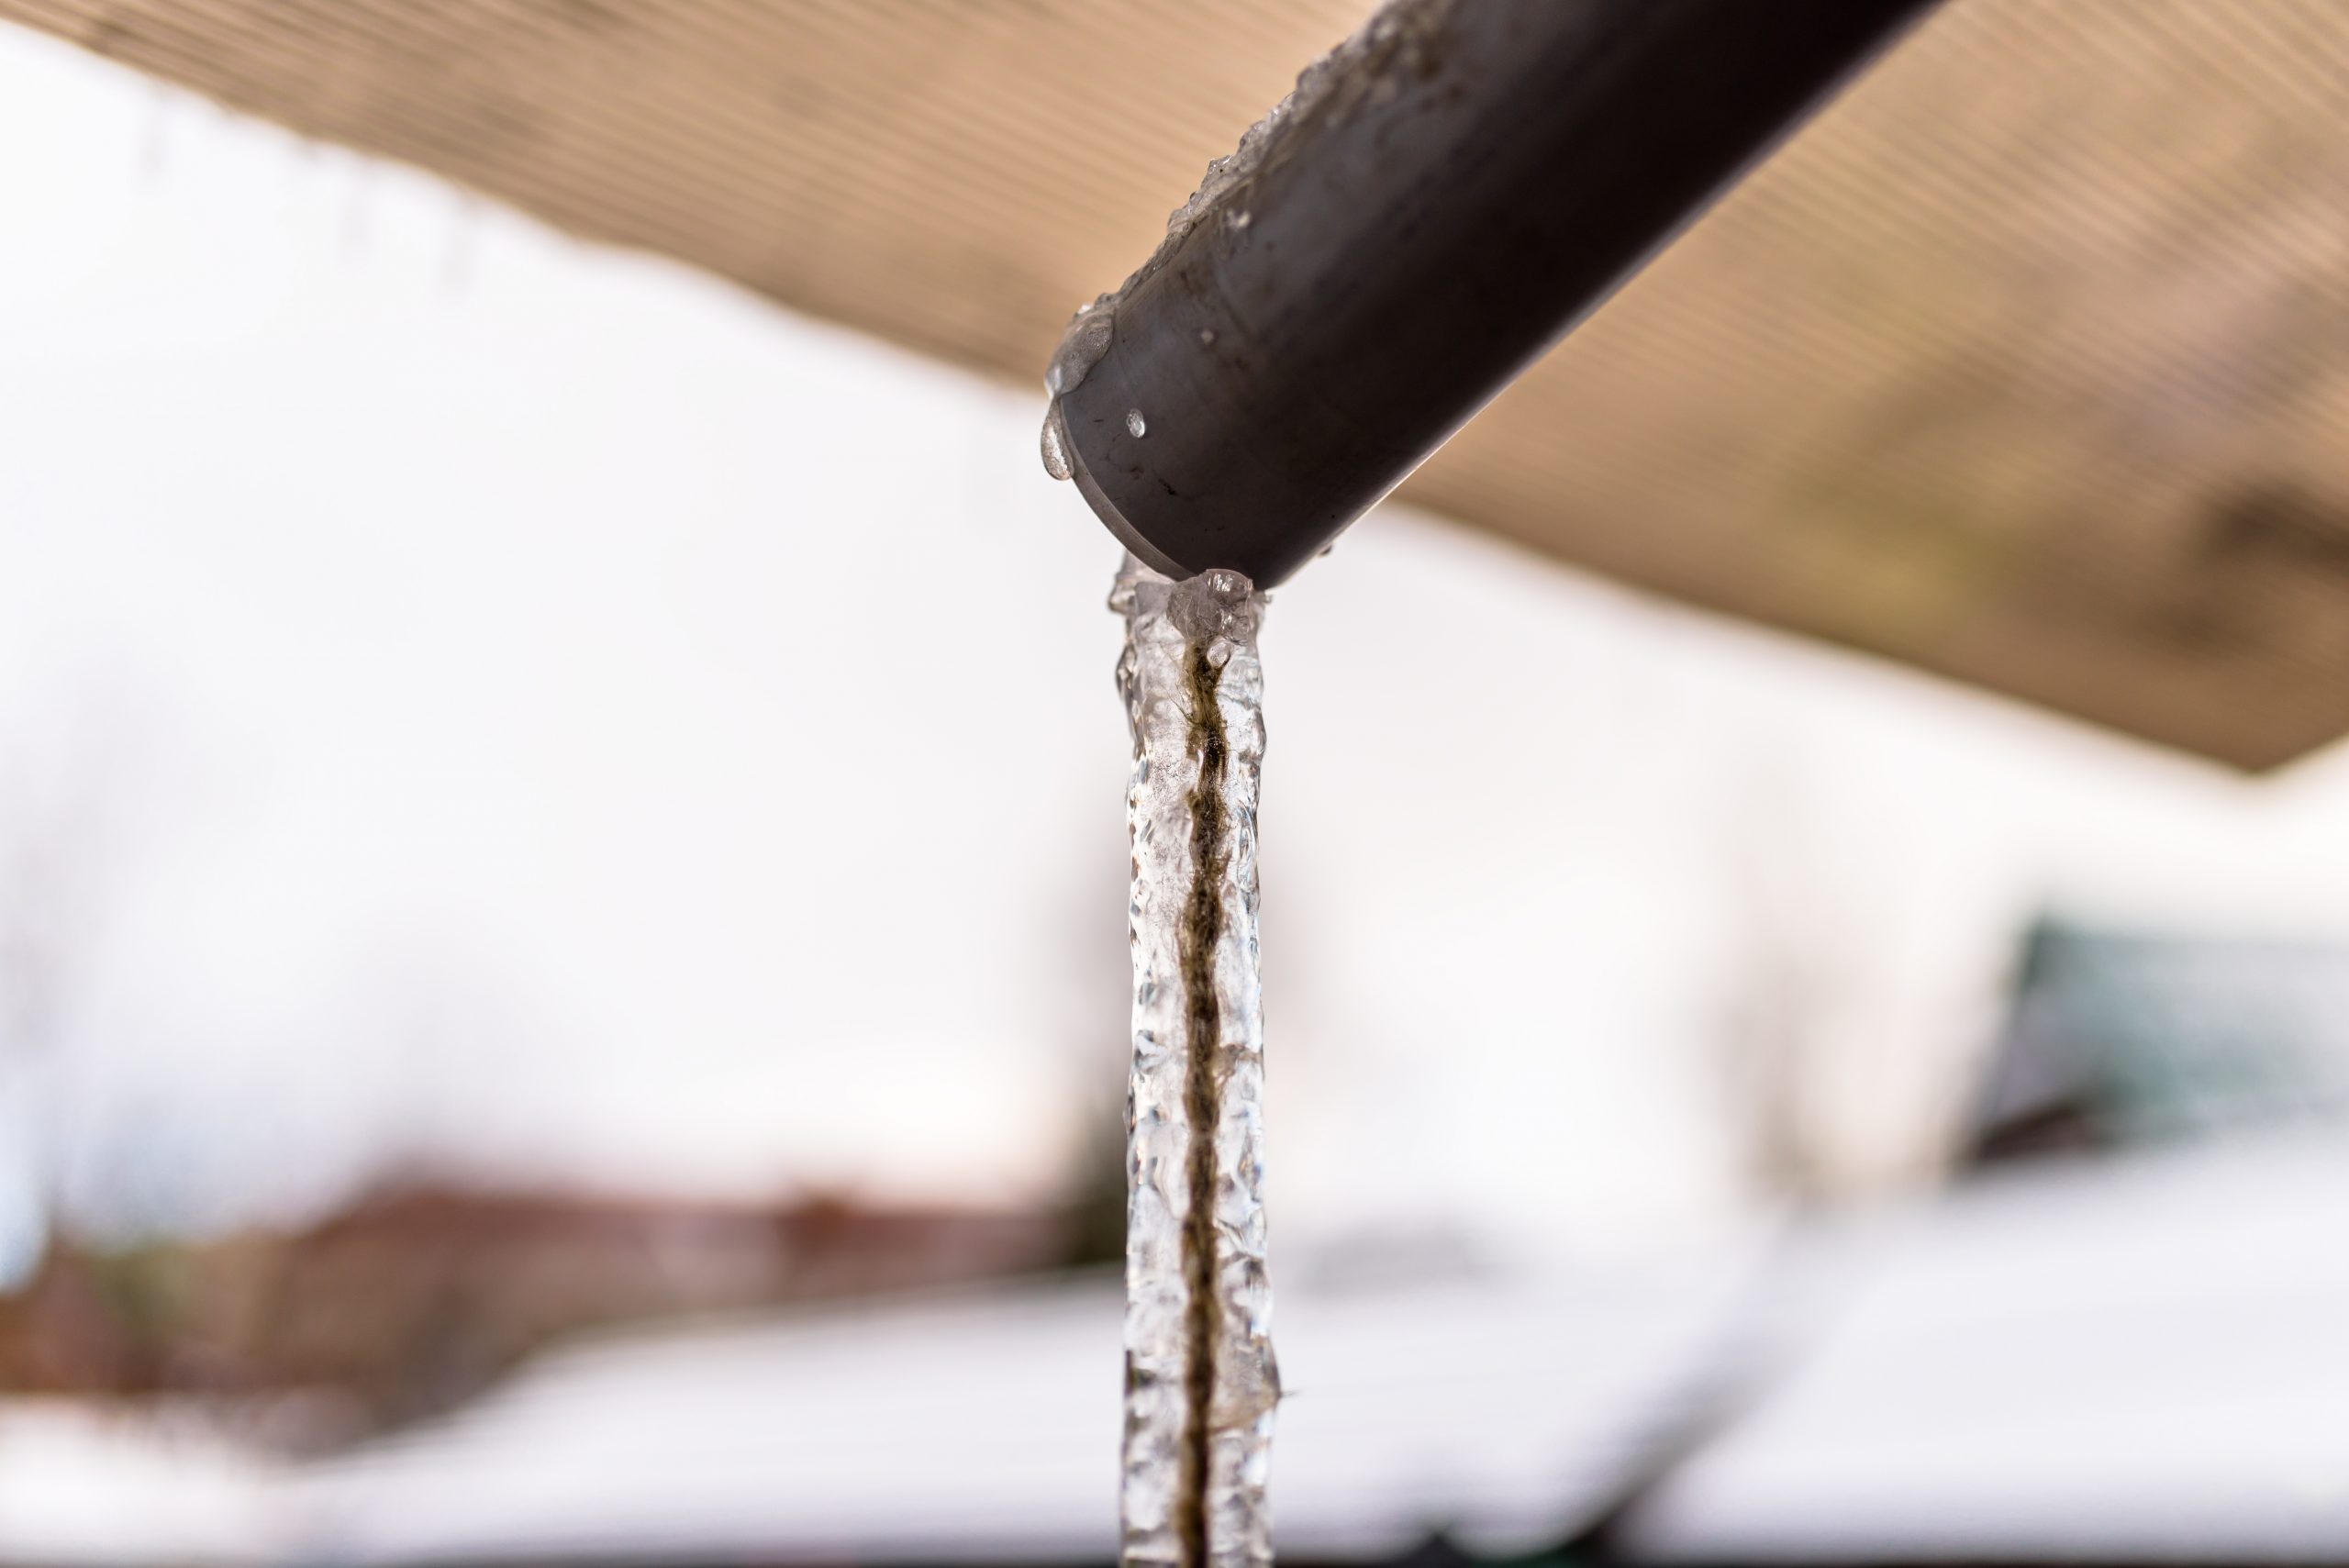 Preventing Frozen Pipes In Your Home